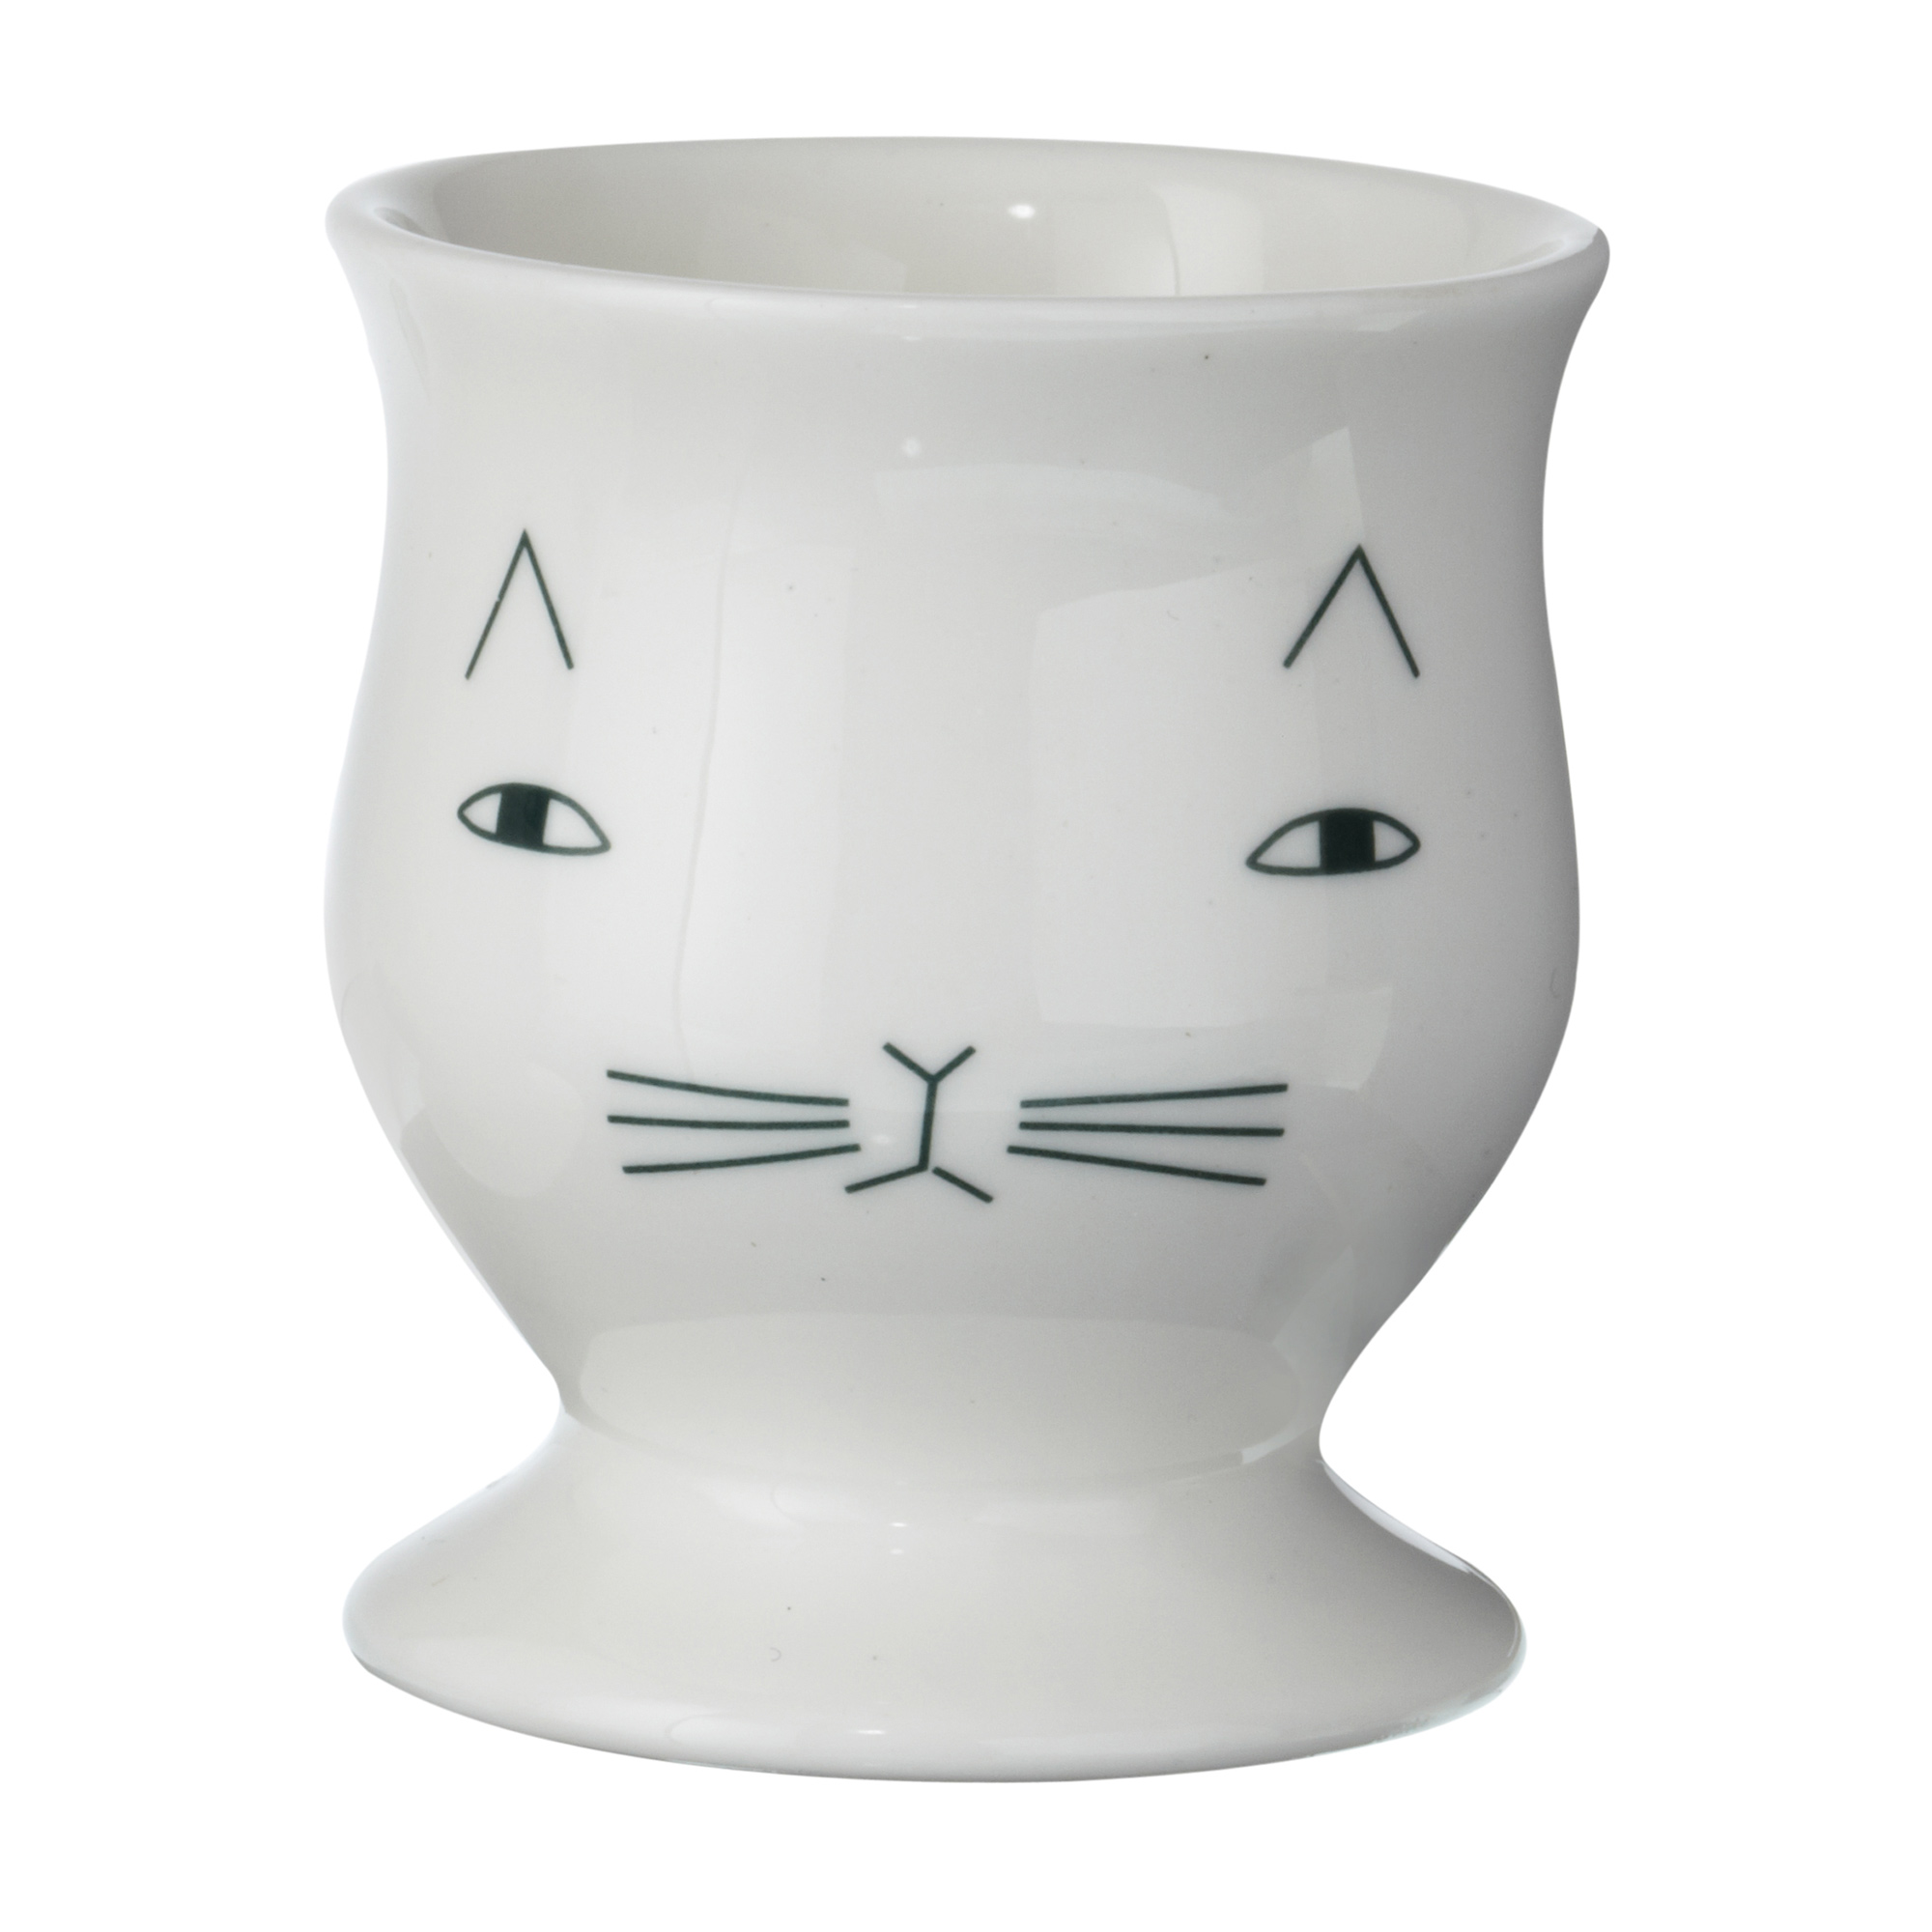 Mog Egg Cup by Donna Wilson. 100% bone china, made in the UK